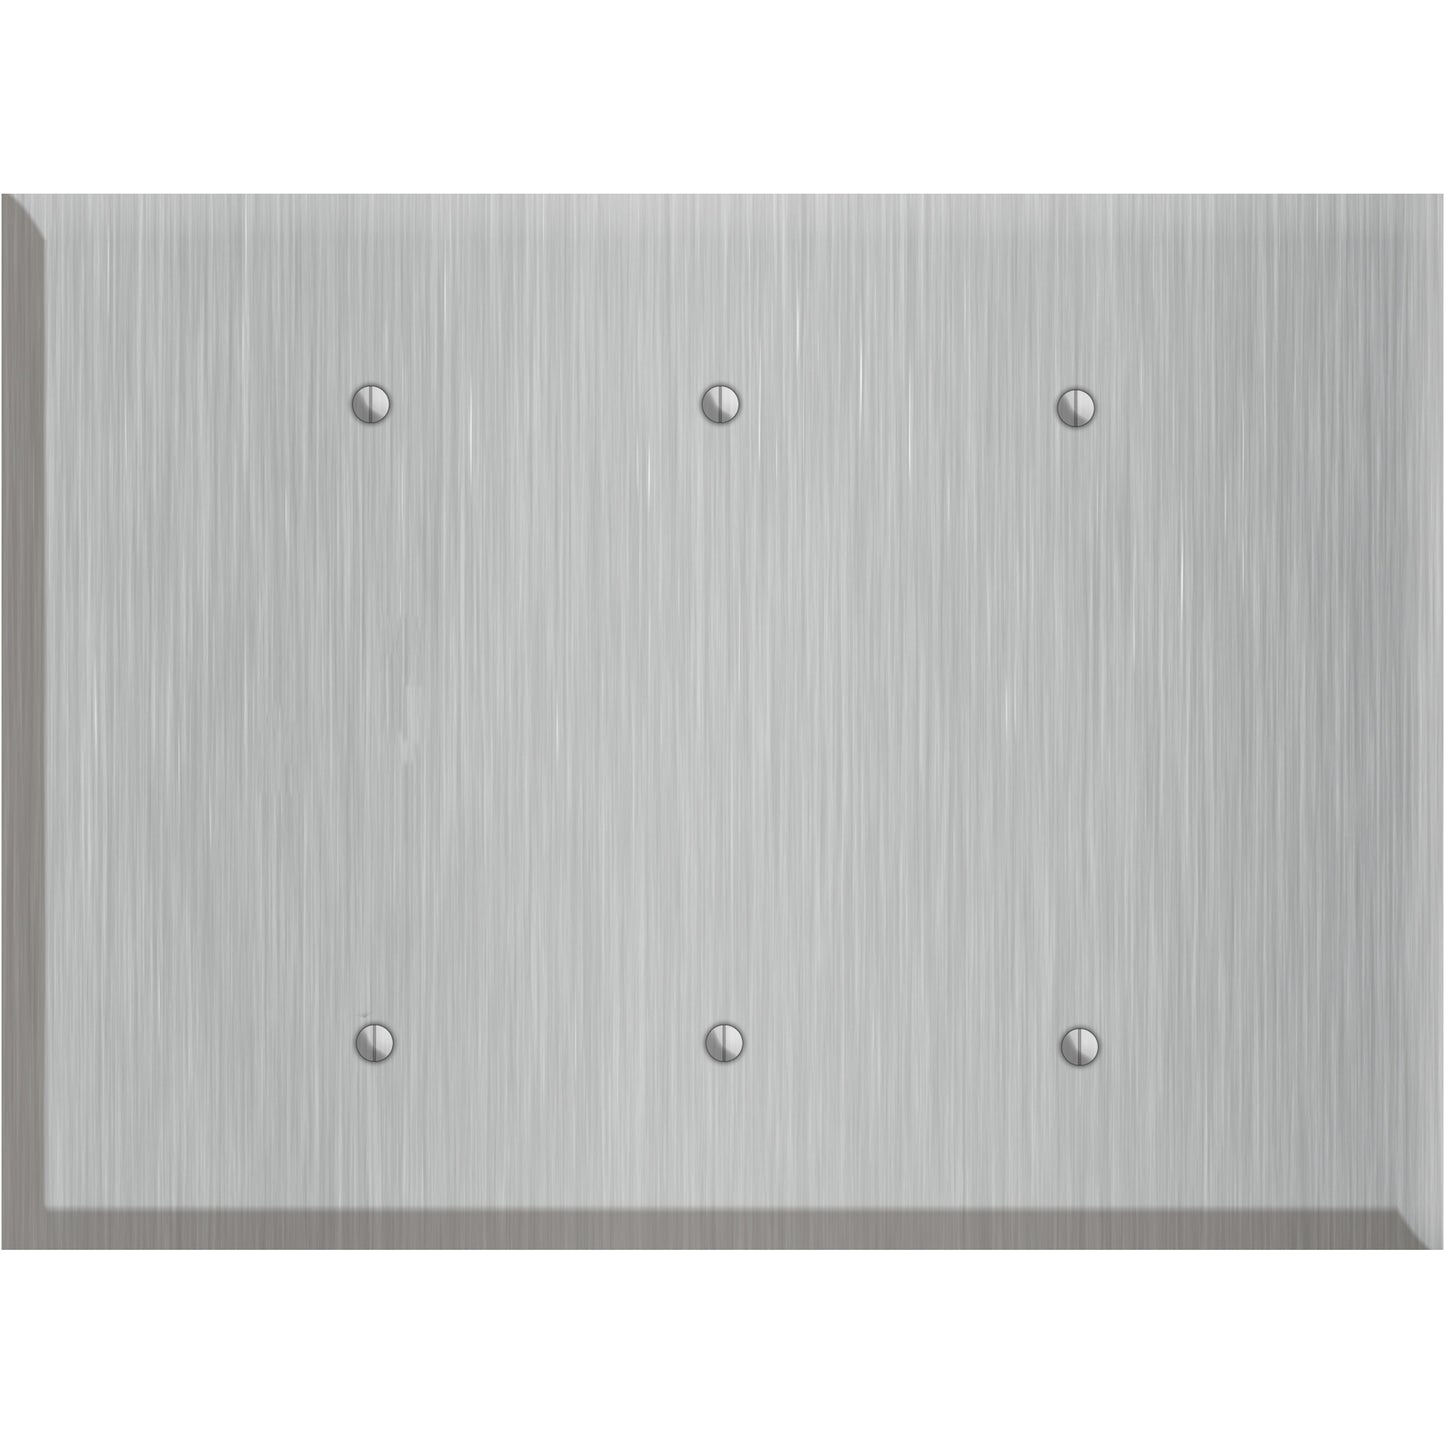 Oversized Discontinued Stainless Steel 3 Blank Wallplate